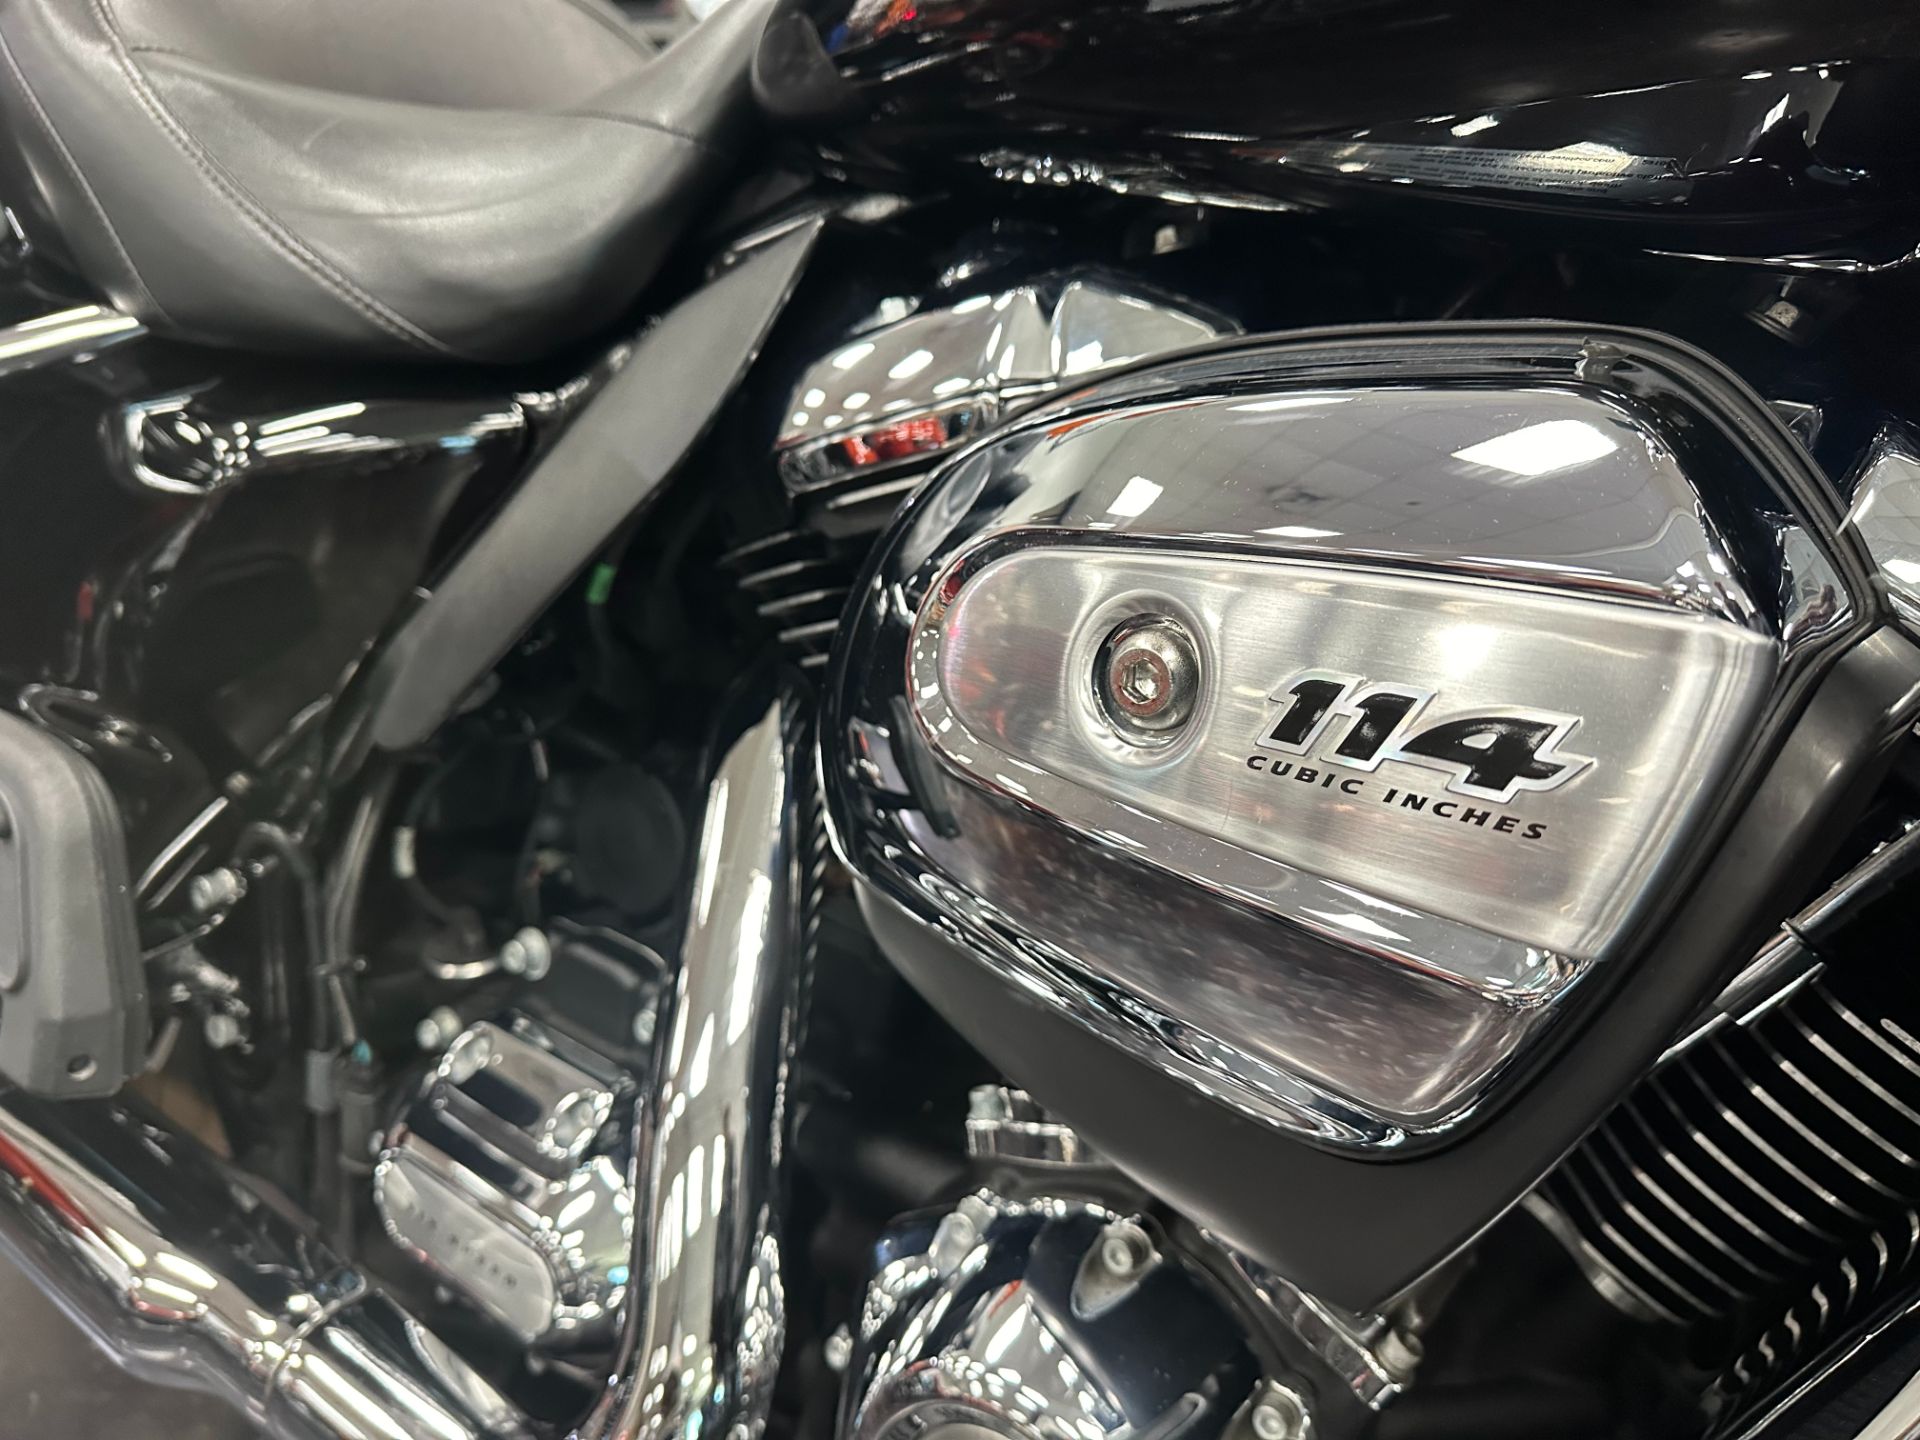 2021 Harley-Davidson Road Glide® Limited in Metairie, Louisiana - Photo 6